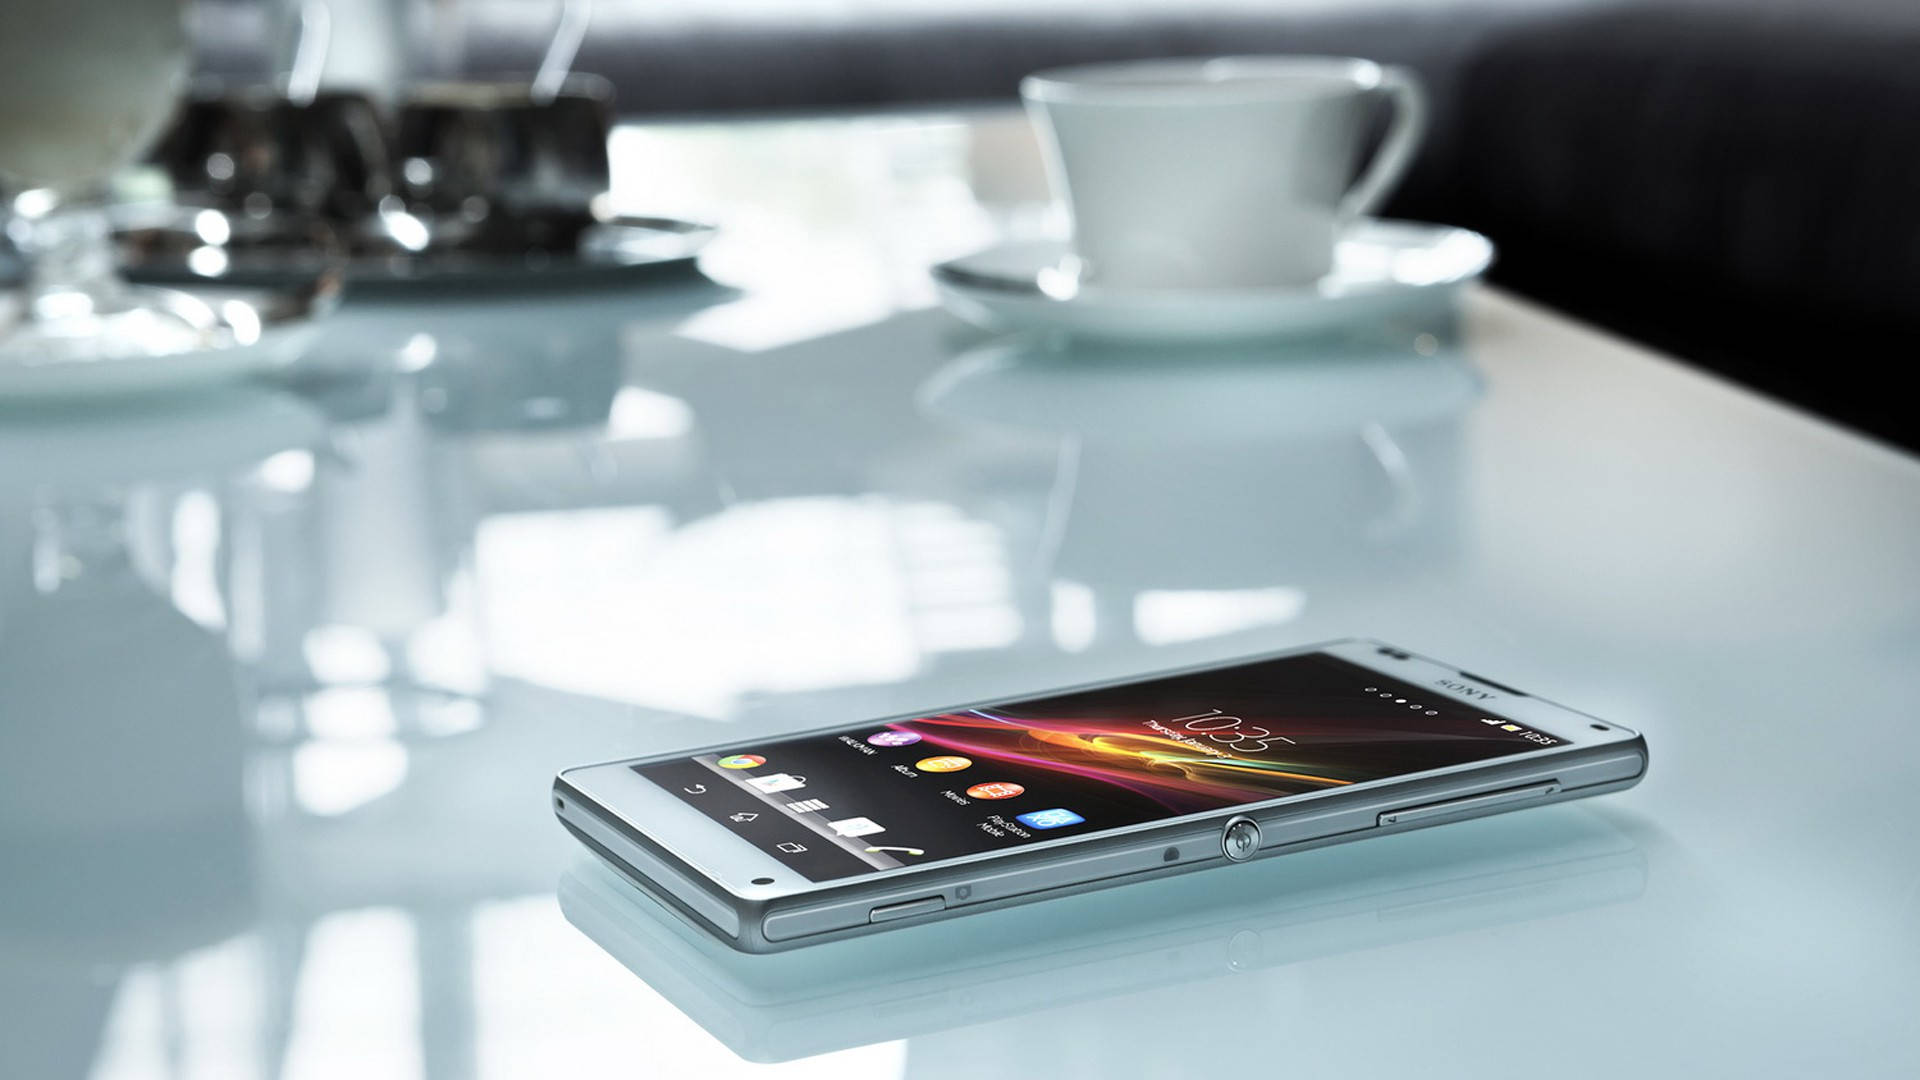 Sony Xperia On Table Wallpaper